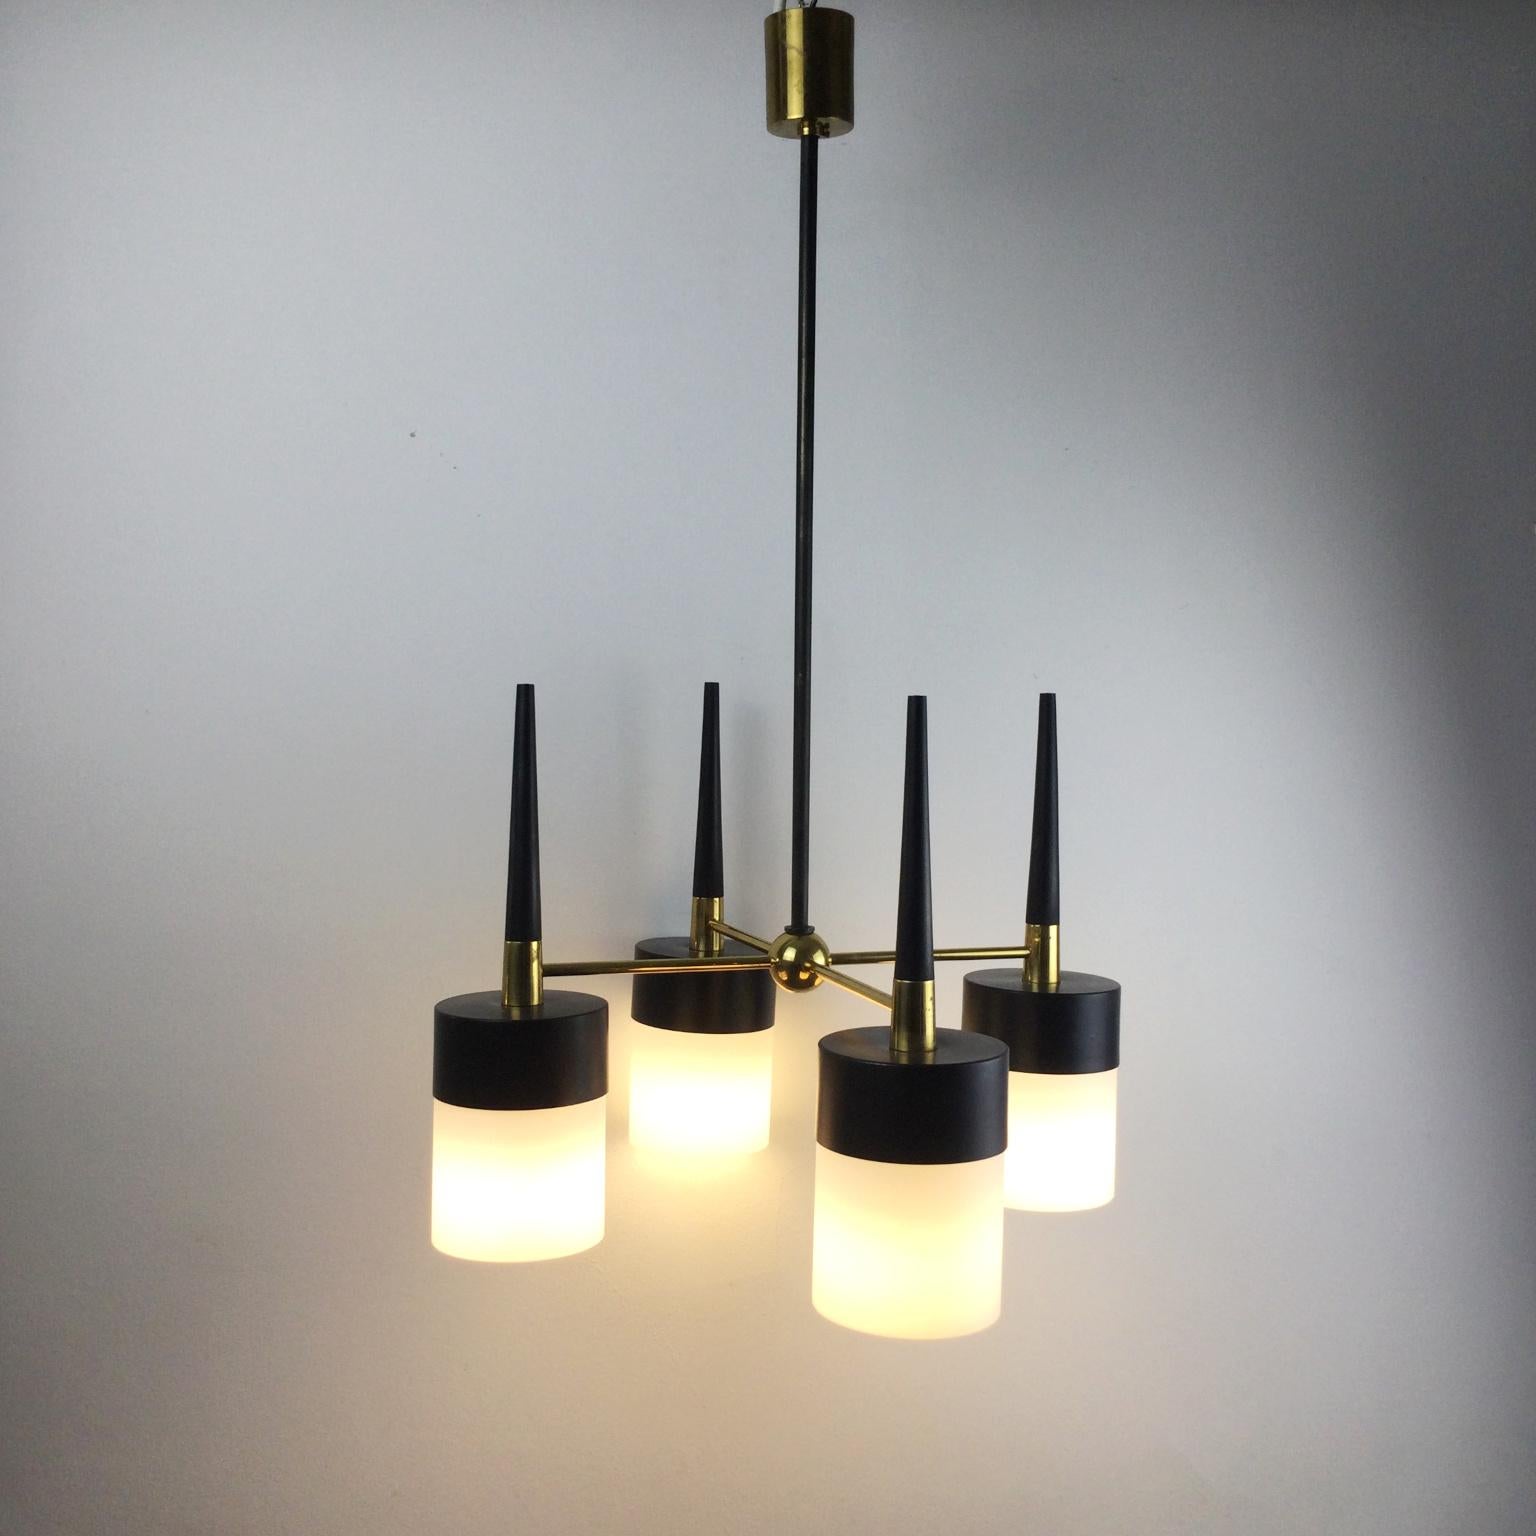 1950s Arlus Ceiling Light with Four Opalines Glass Shade and Brass Finish 1